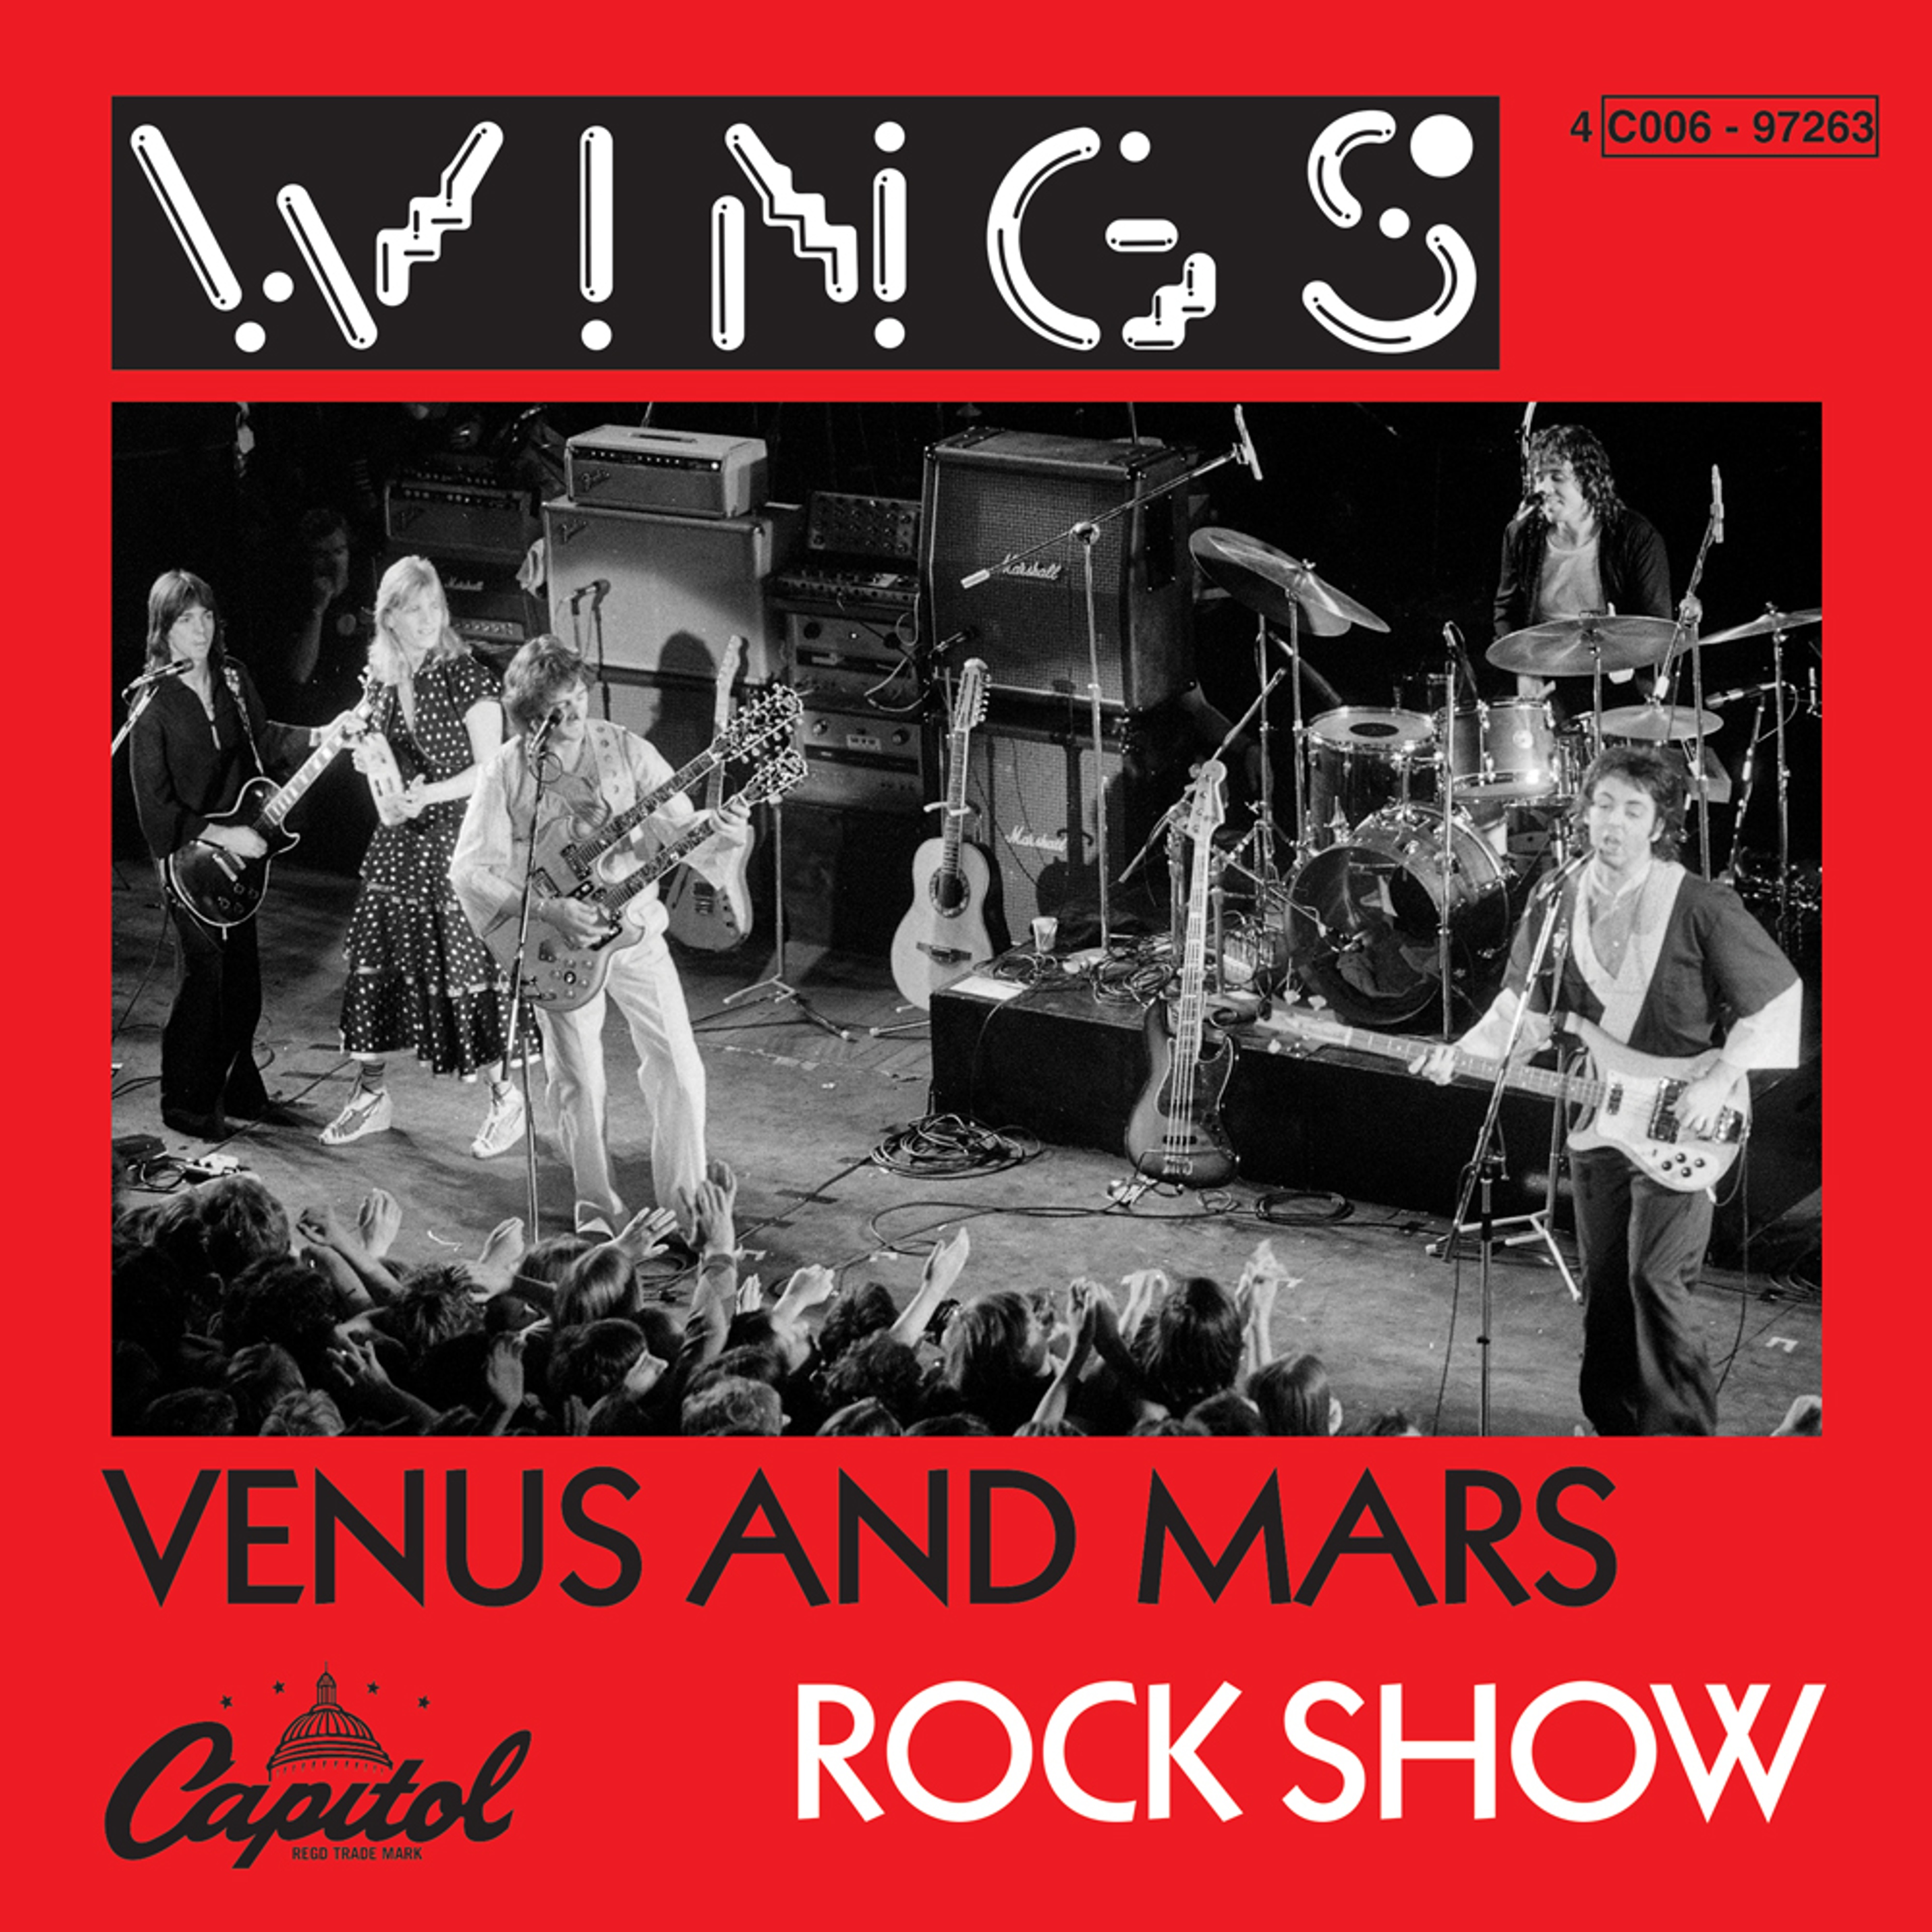 “Venus and Mars / Rock Show” Single artwork as featured in 'The 7" Singles Box'